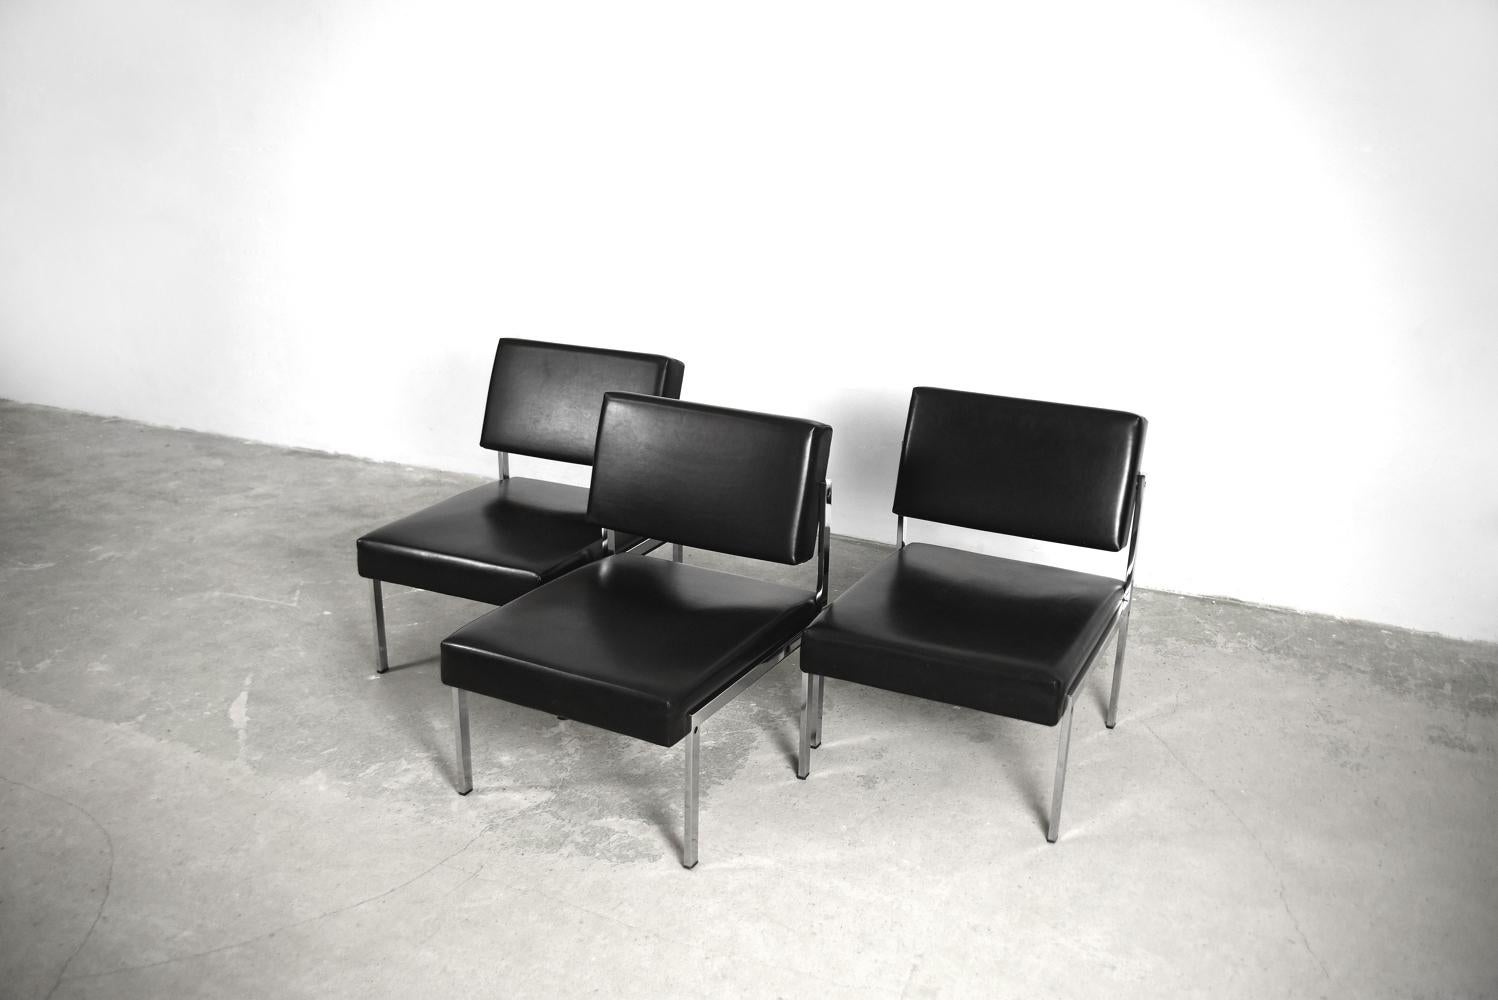 Minimalist German Chrome and Leather Modular Lounge Chairs from Brune, 1960s For Sale 1